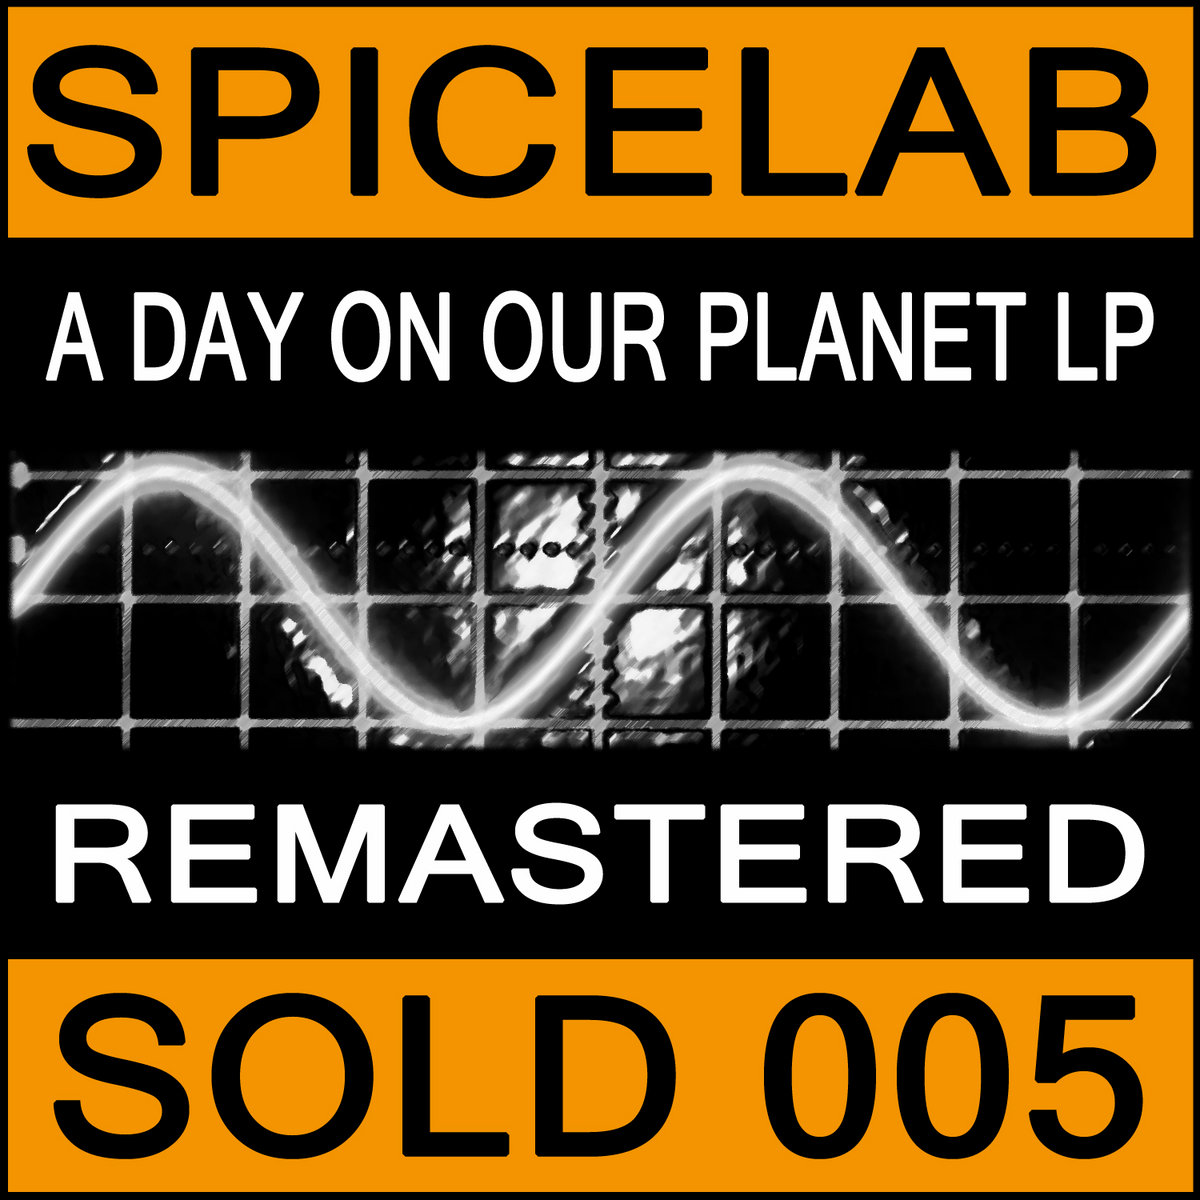 spicelab a day on our planet